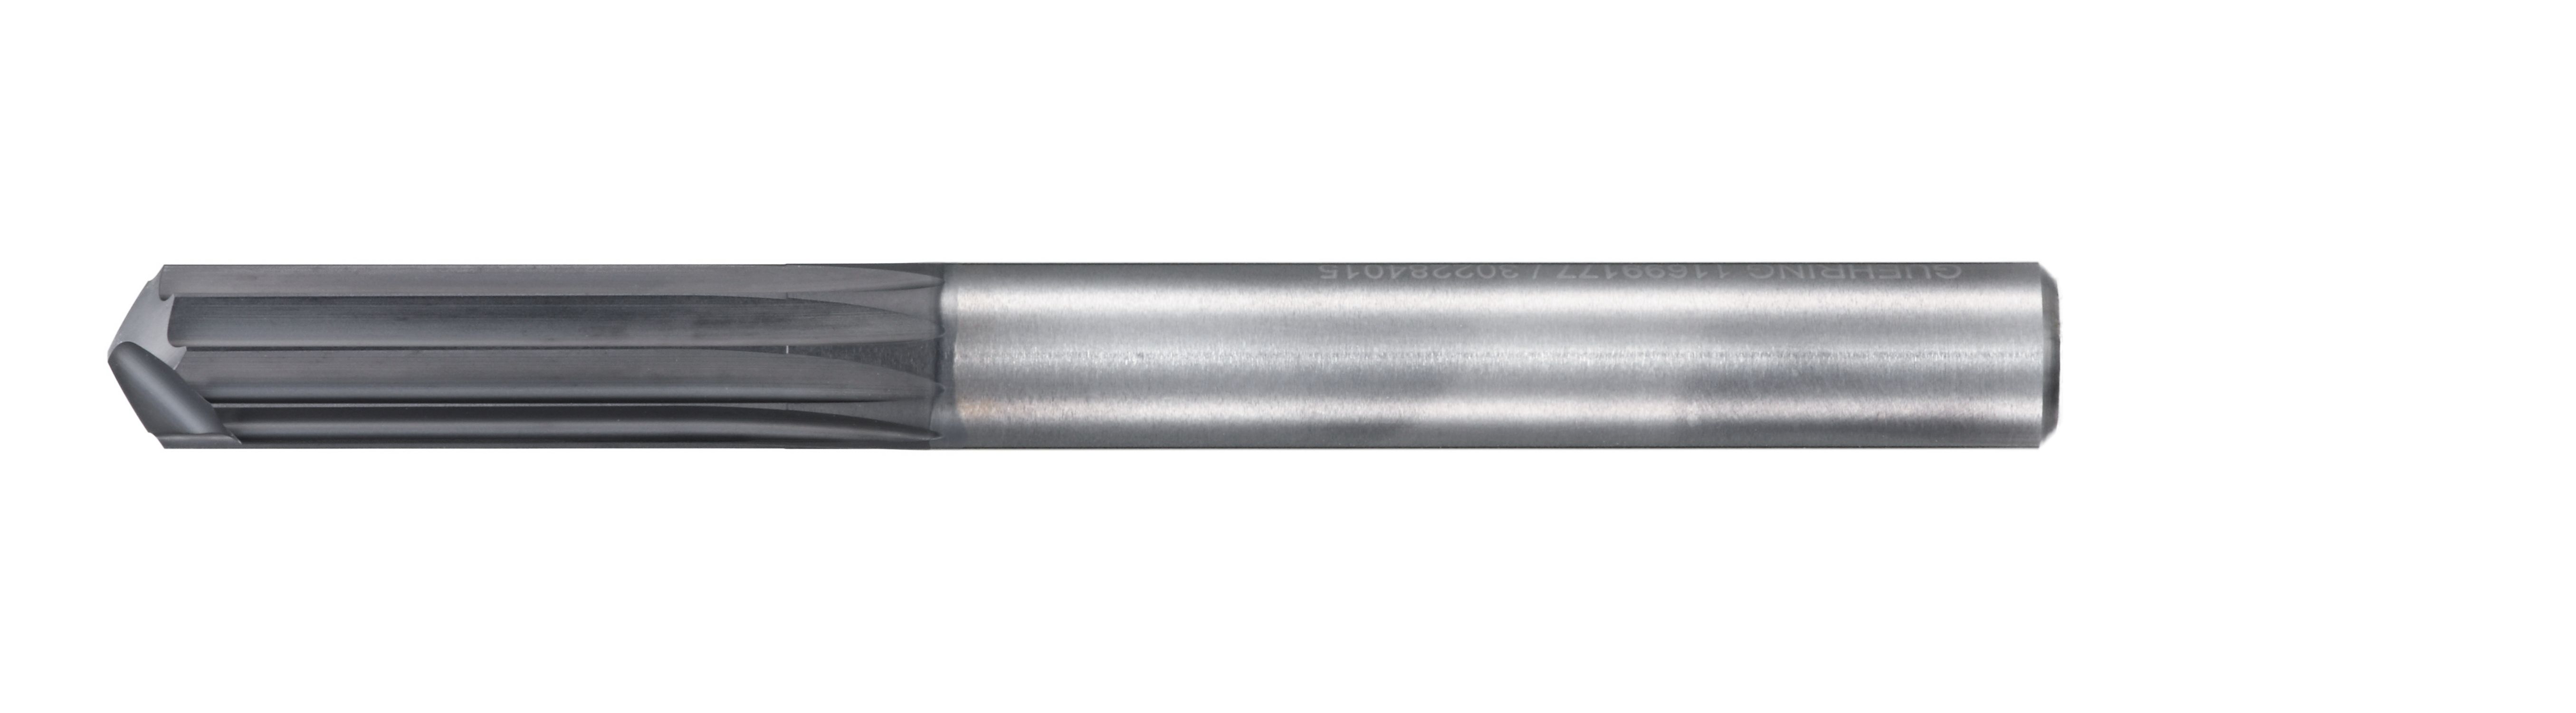 Grooving/Shouldering Multi-Flute End Mill for CFRP with Drill Point CR100 6720 (6720-010.000) 